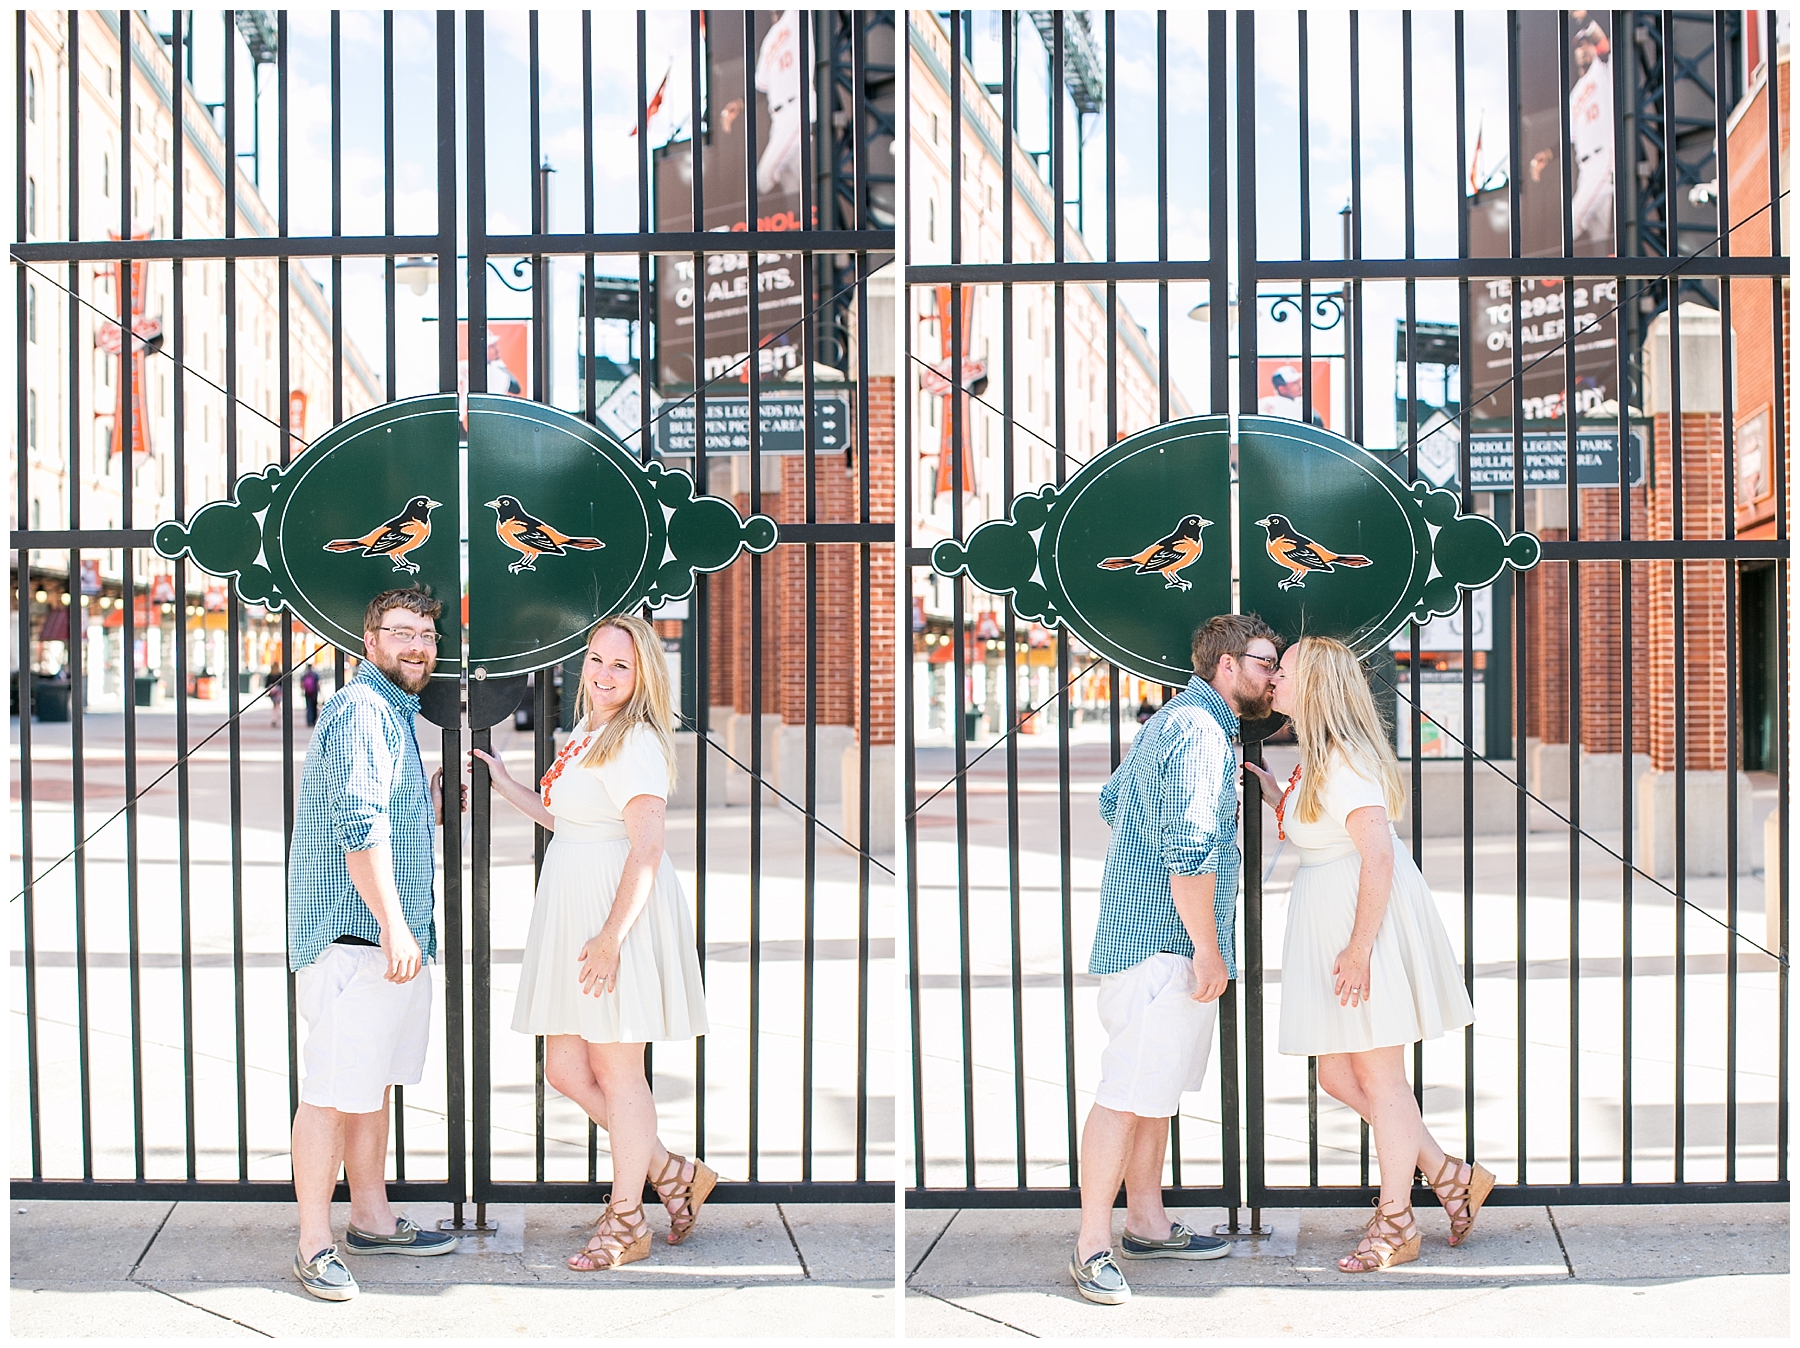 Tess Ray Camden Yards Engagement Session Living Radiant Photography photos_0036.jpg